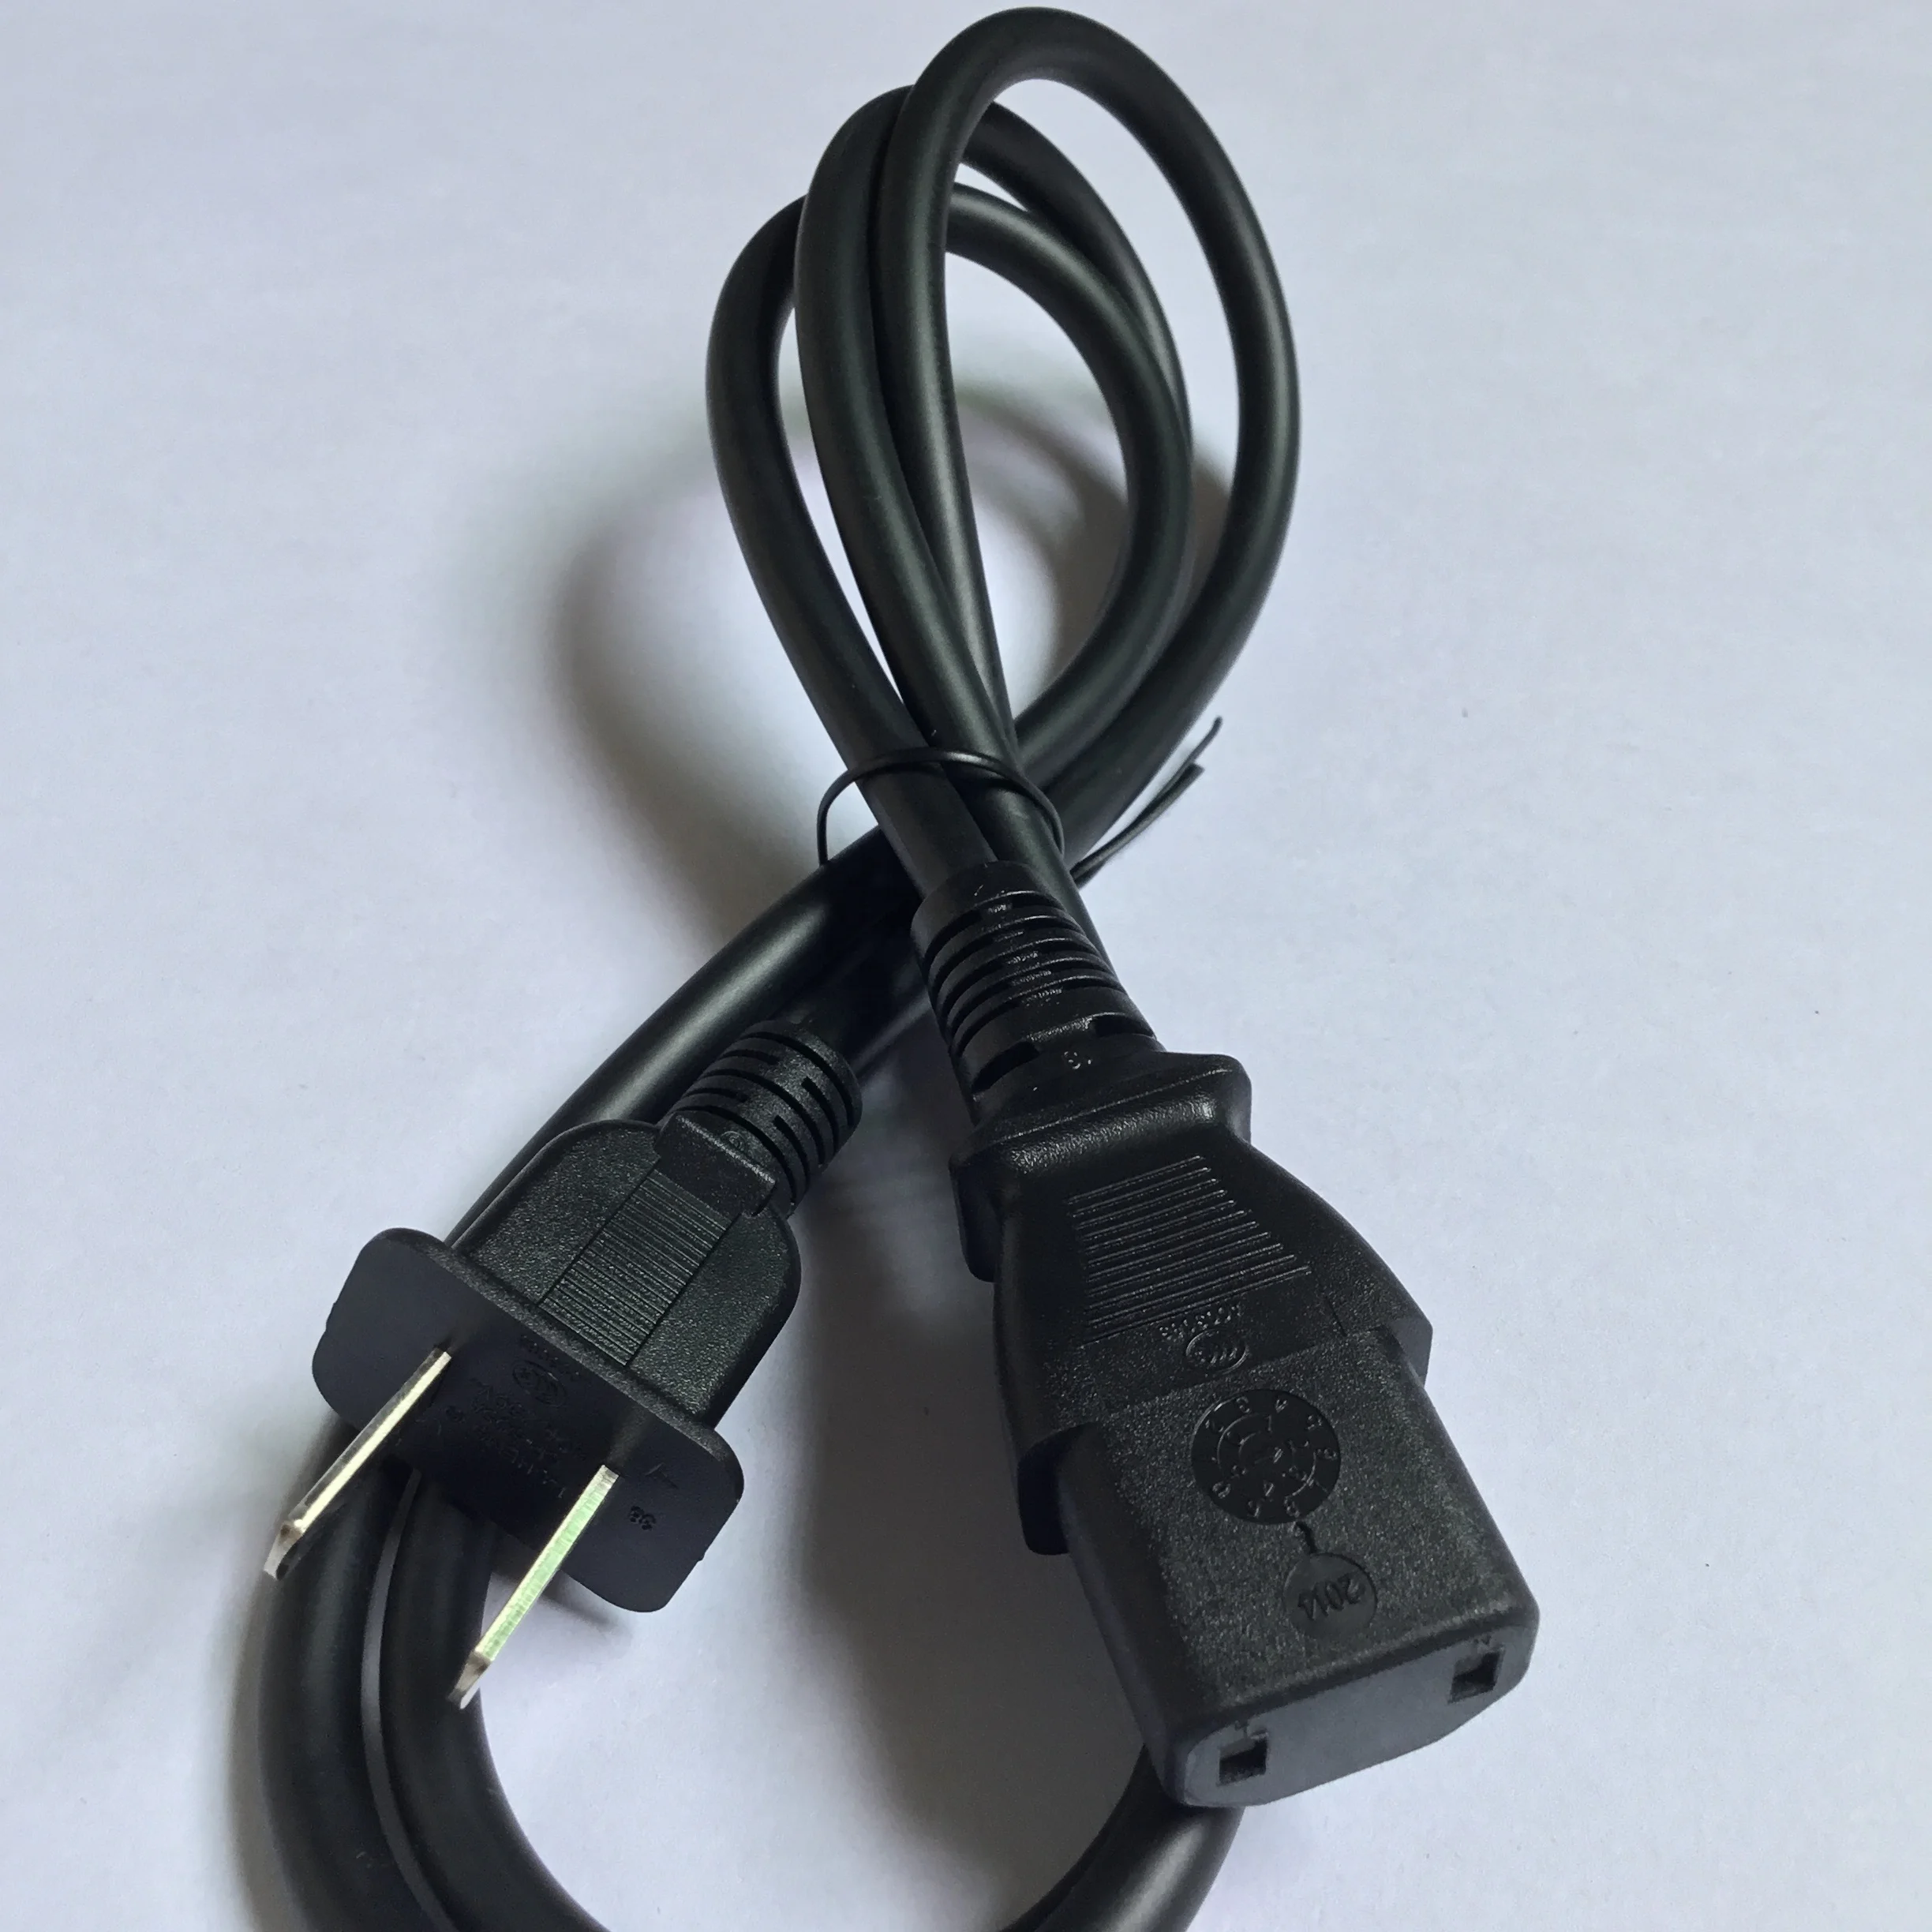 ps4 pro power cord